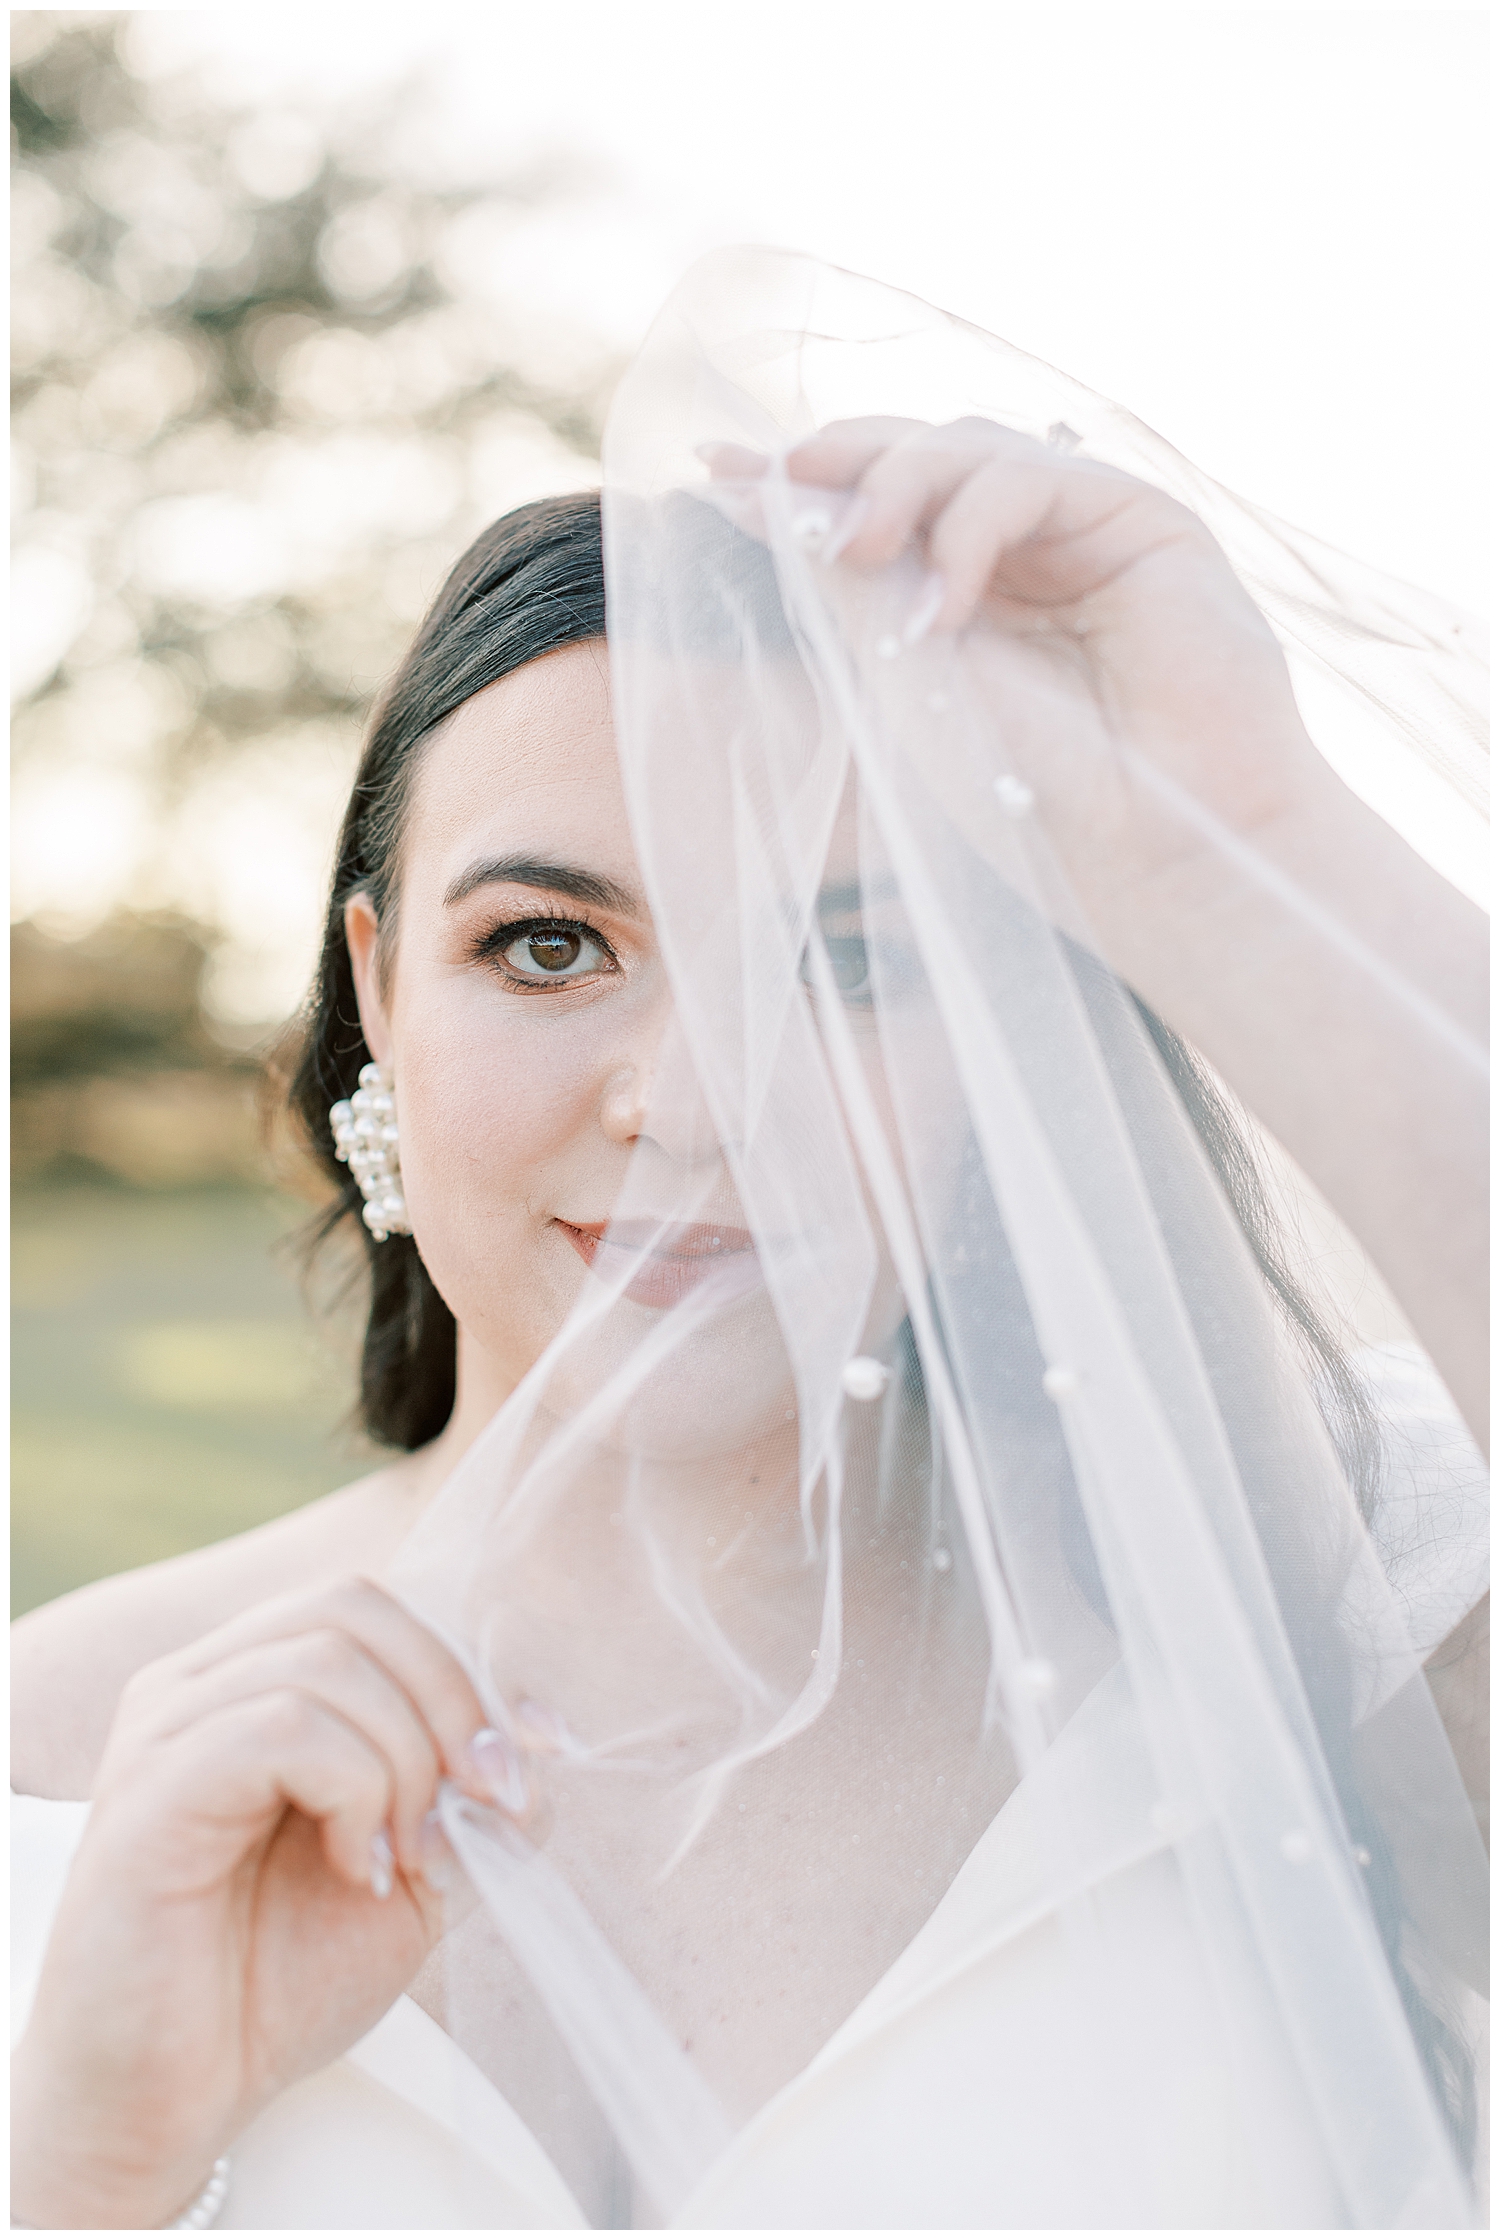 A bride holds the pearl veil over her face.